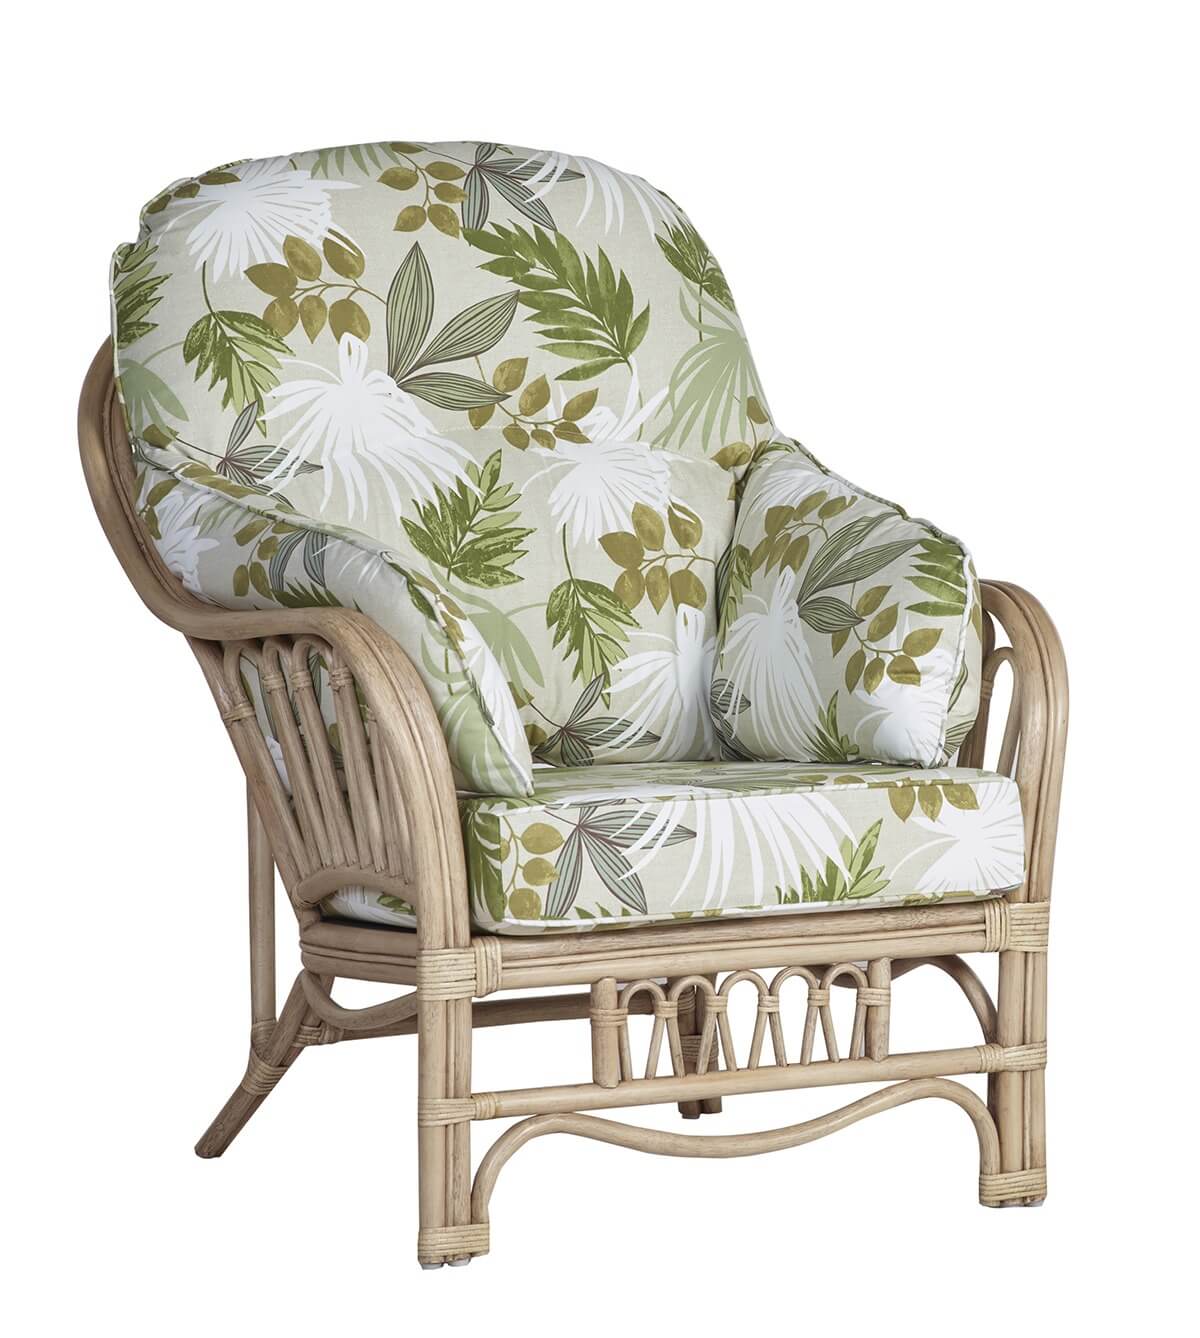 Showing image for Baltimore armchair